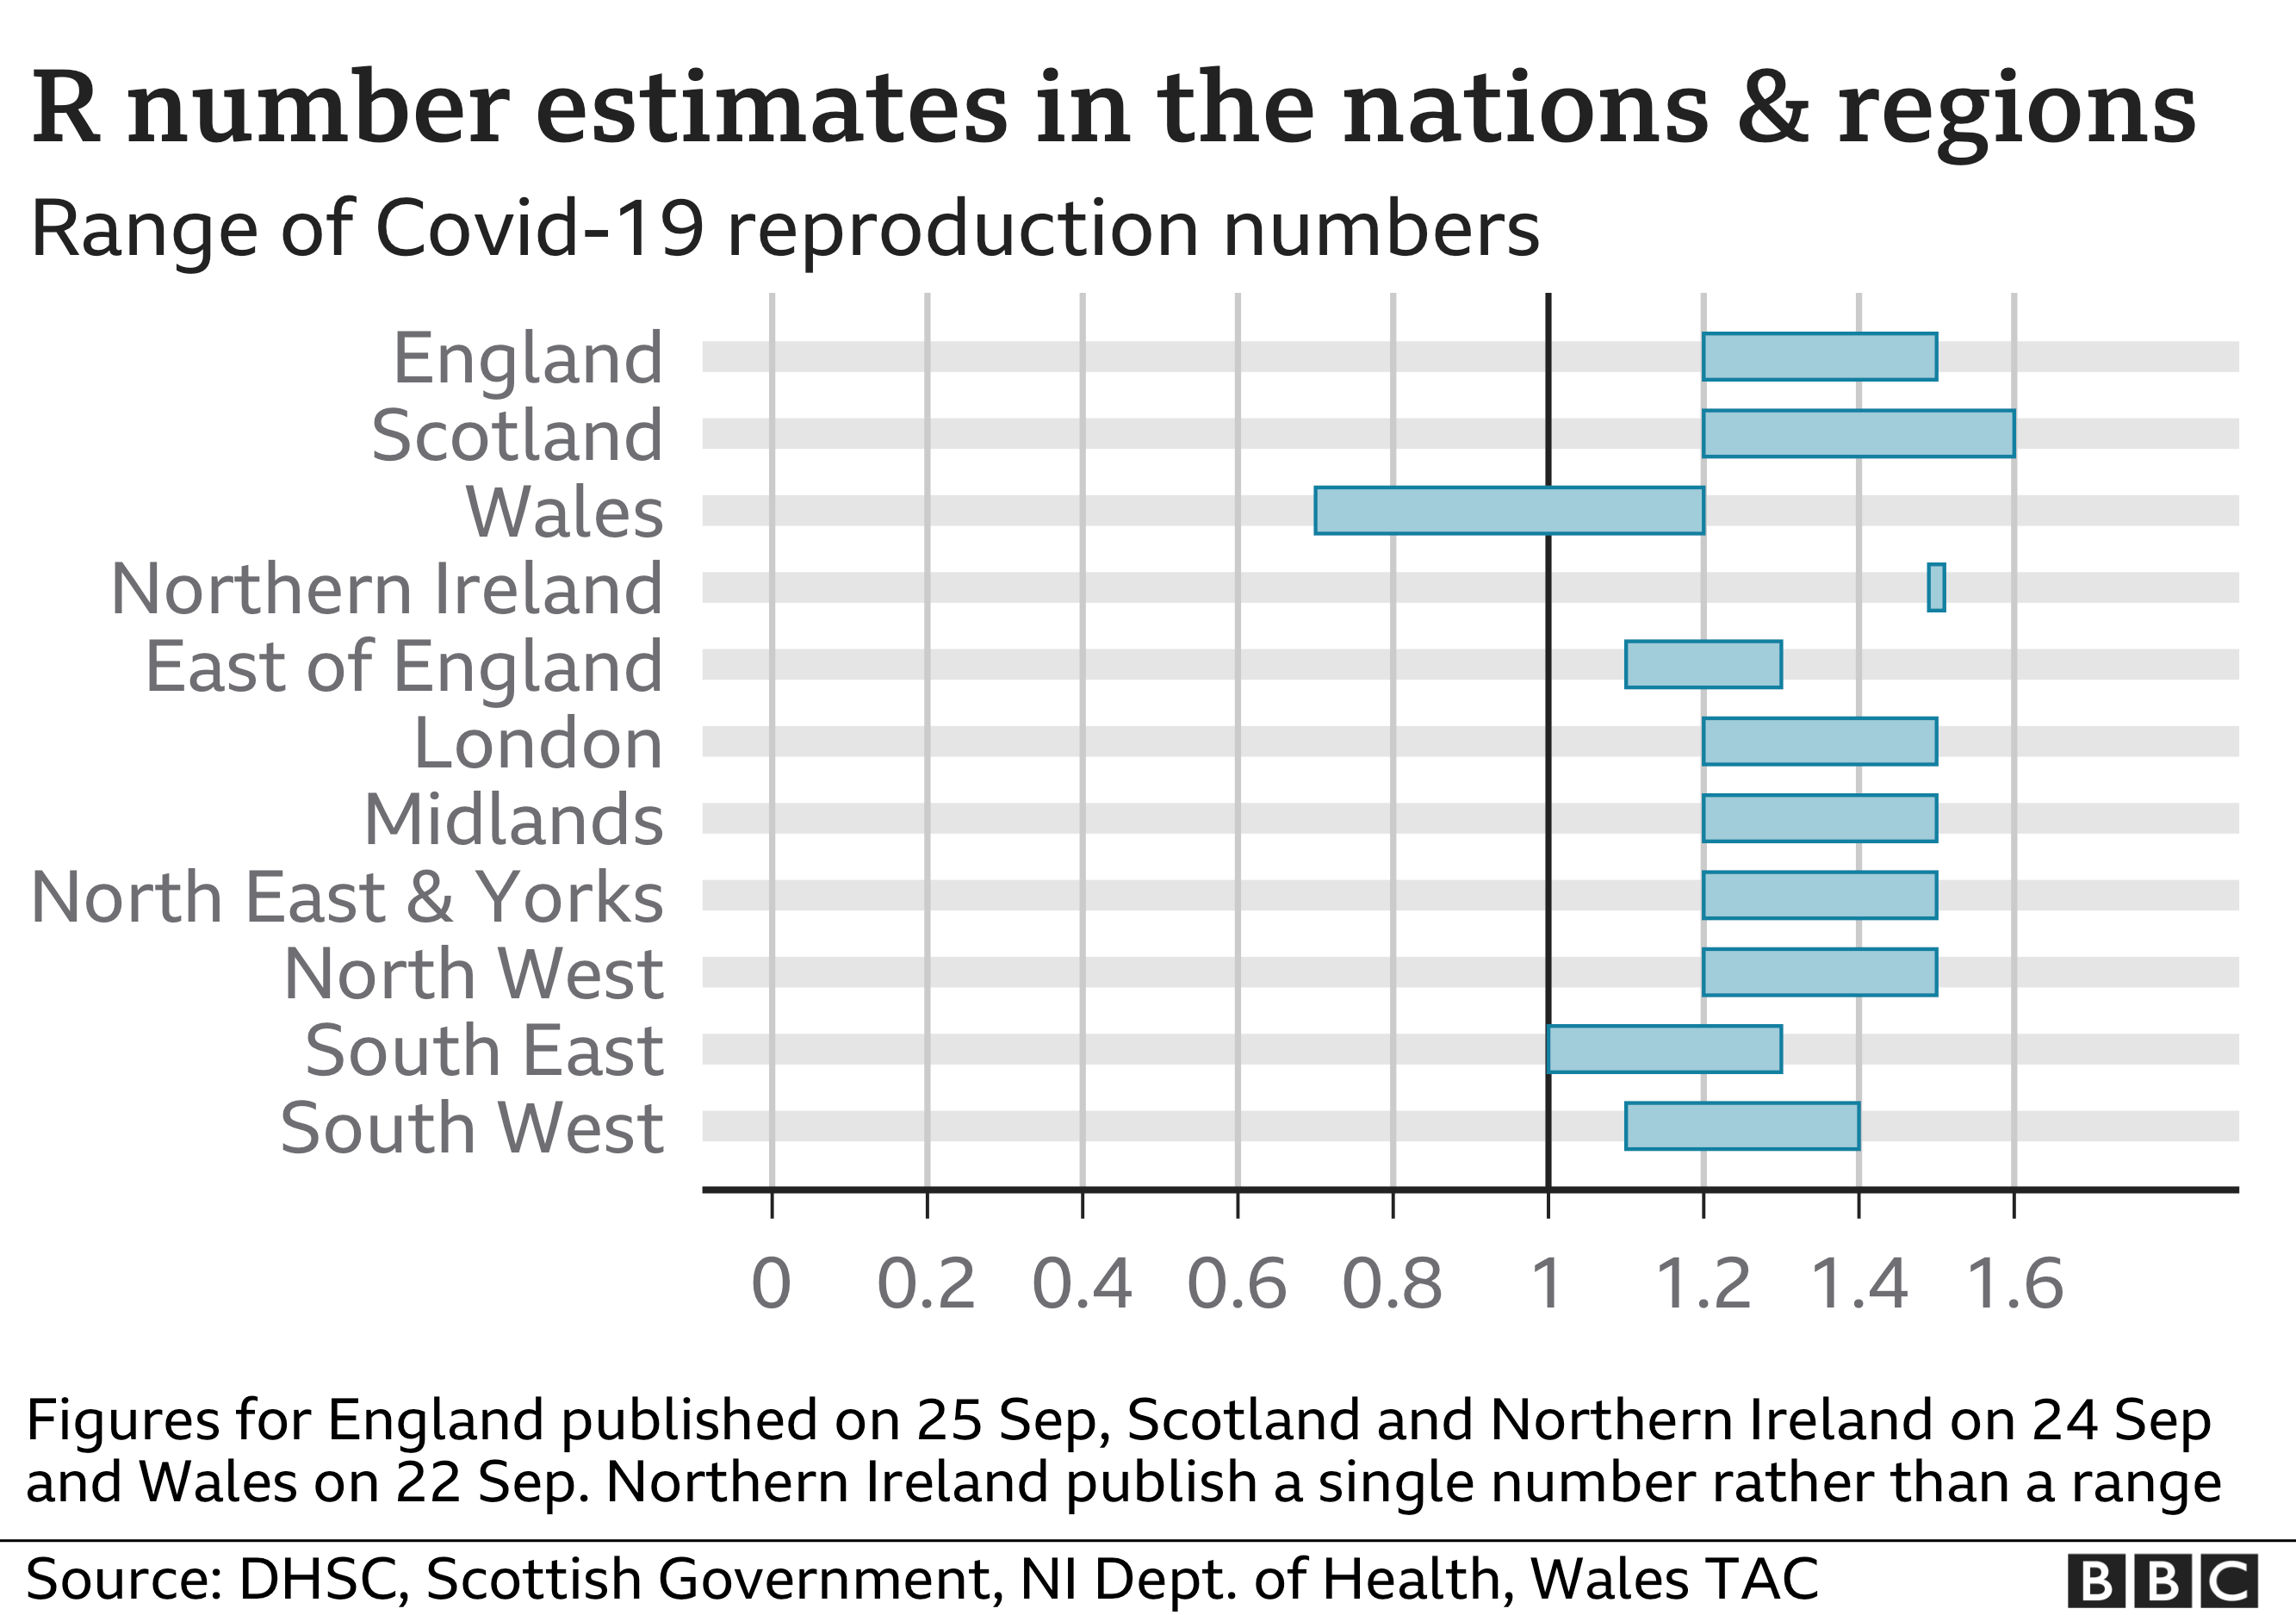 R number estimates in nations and regions